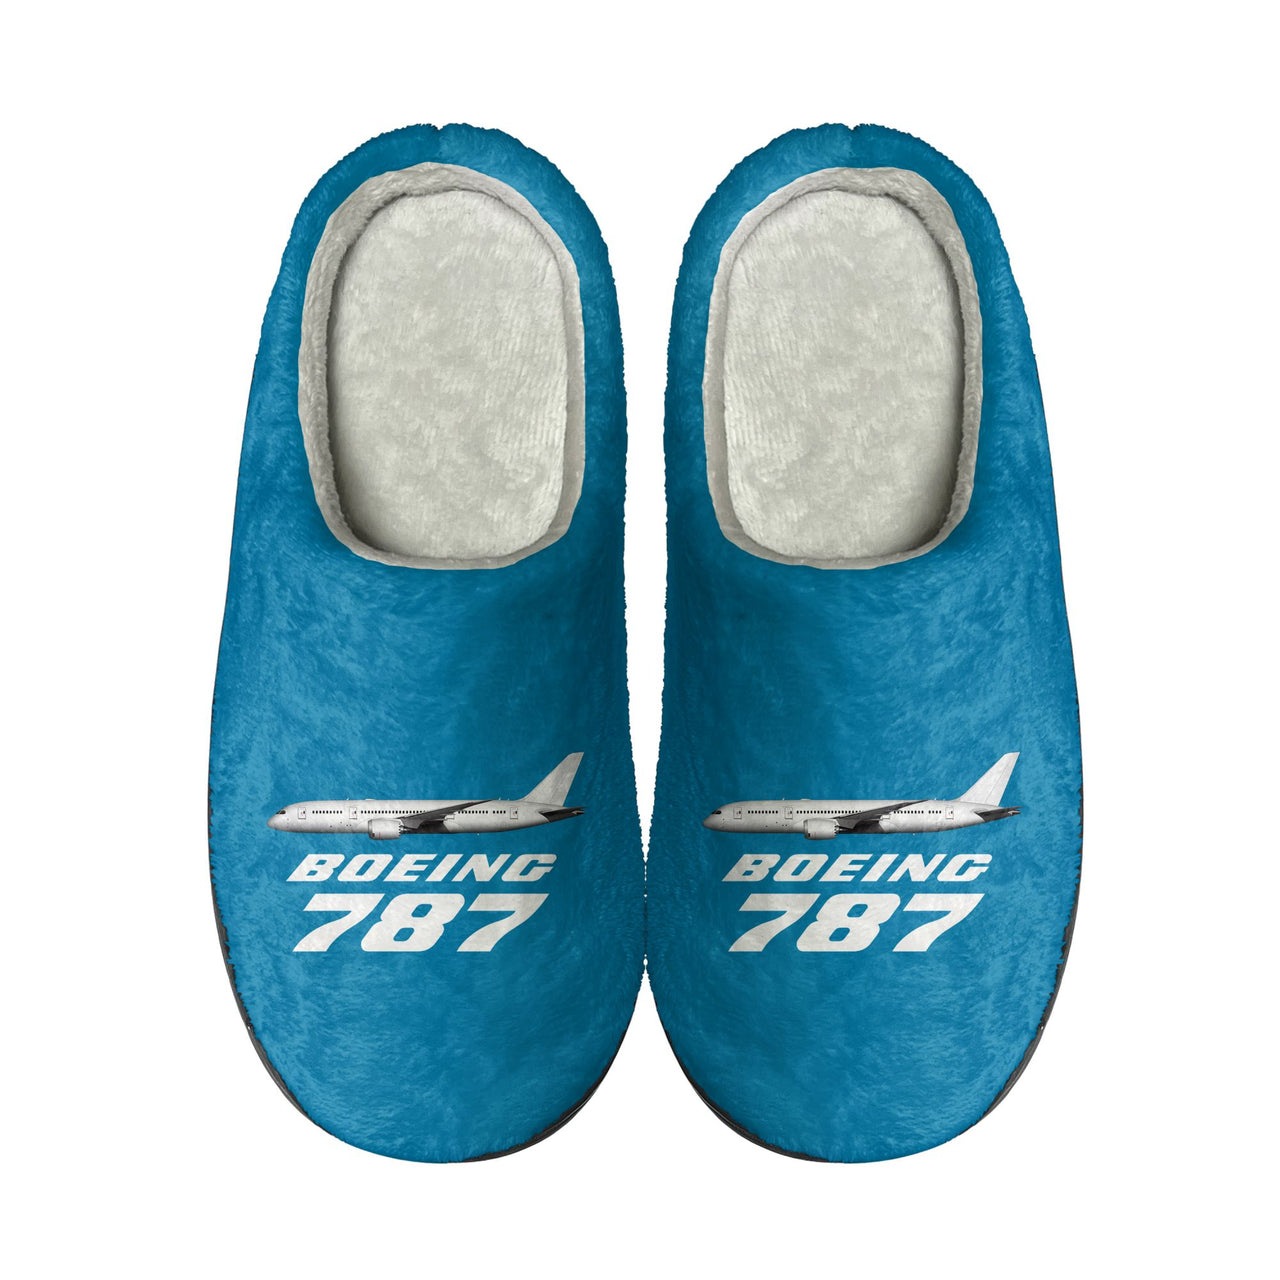 The Boeing 787 Designed Cotton Slippers